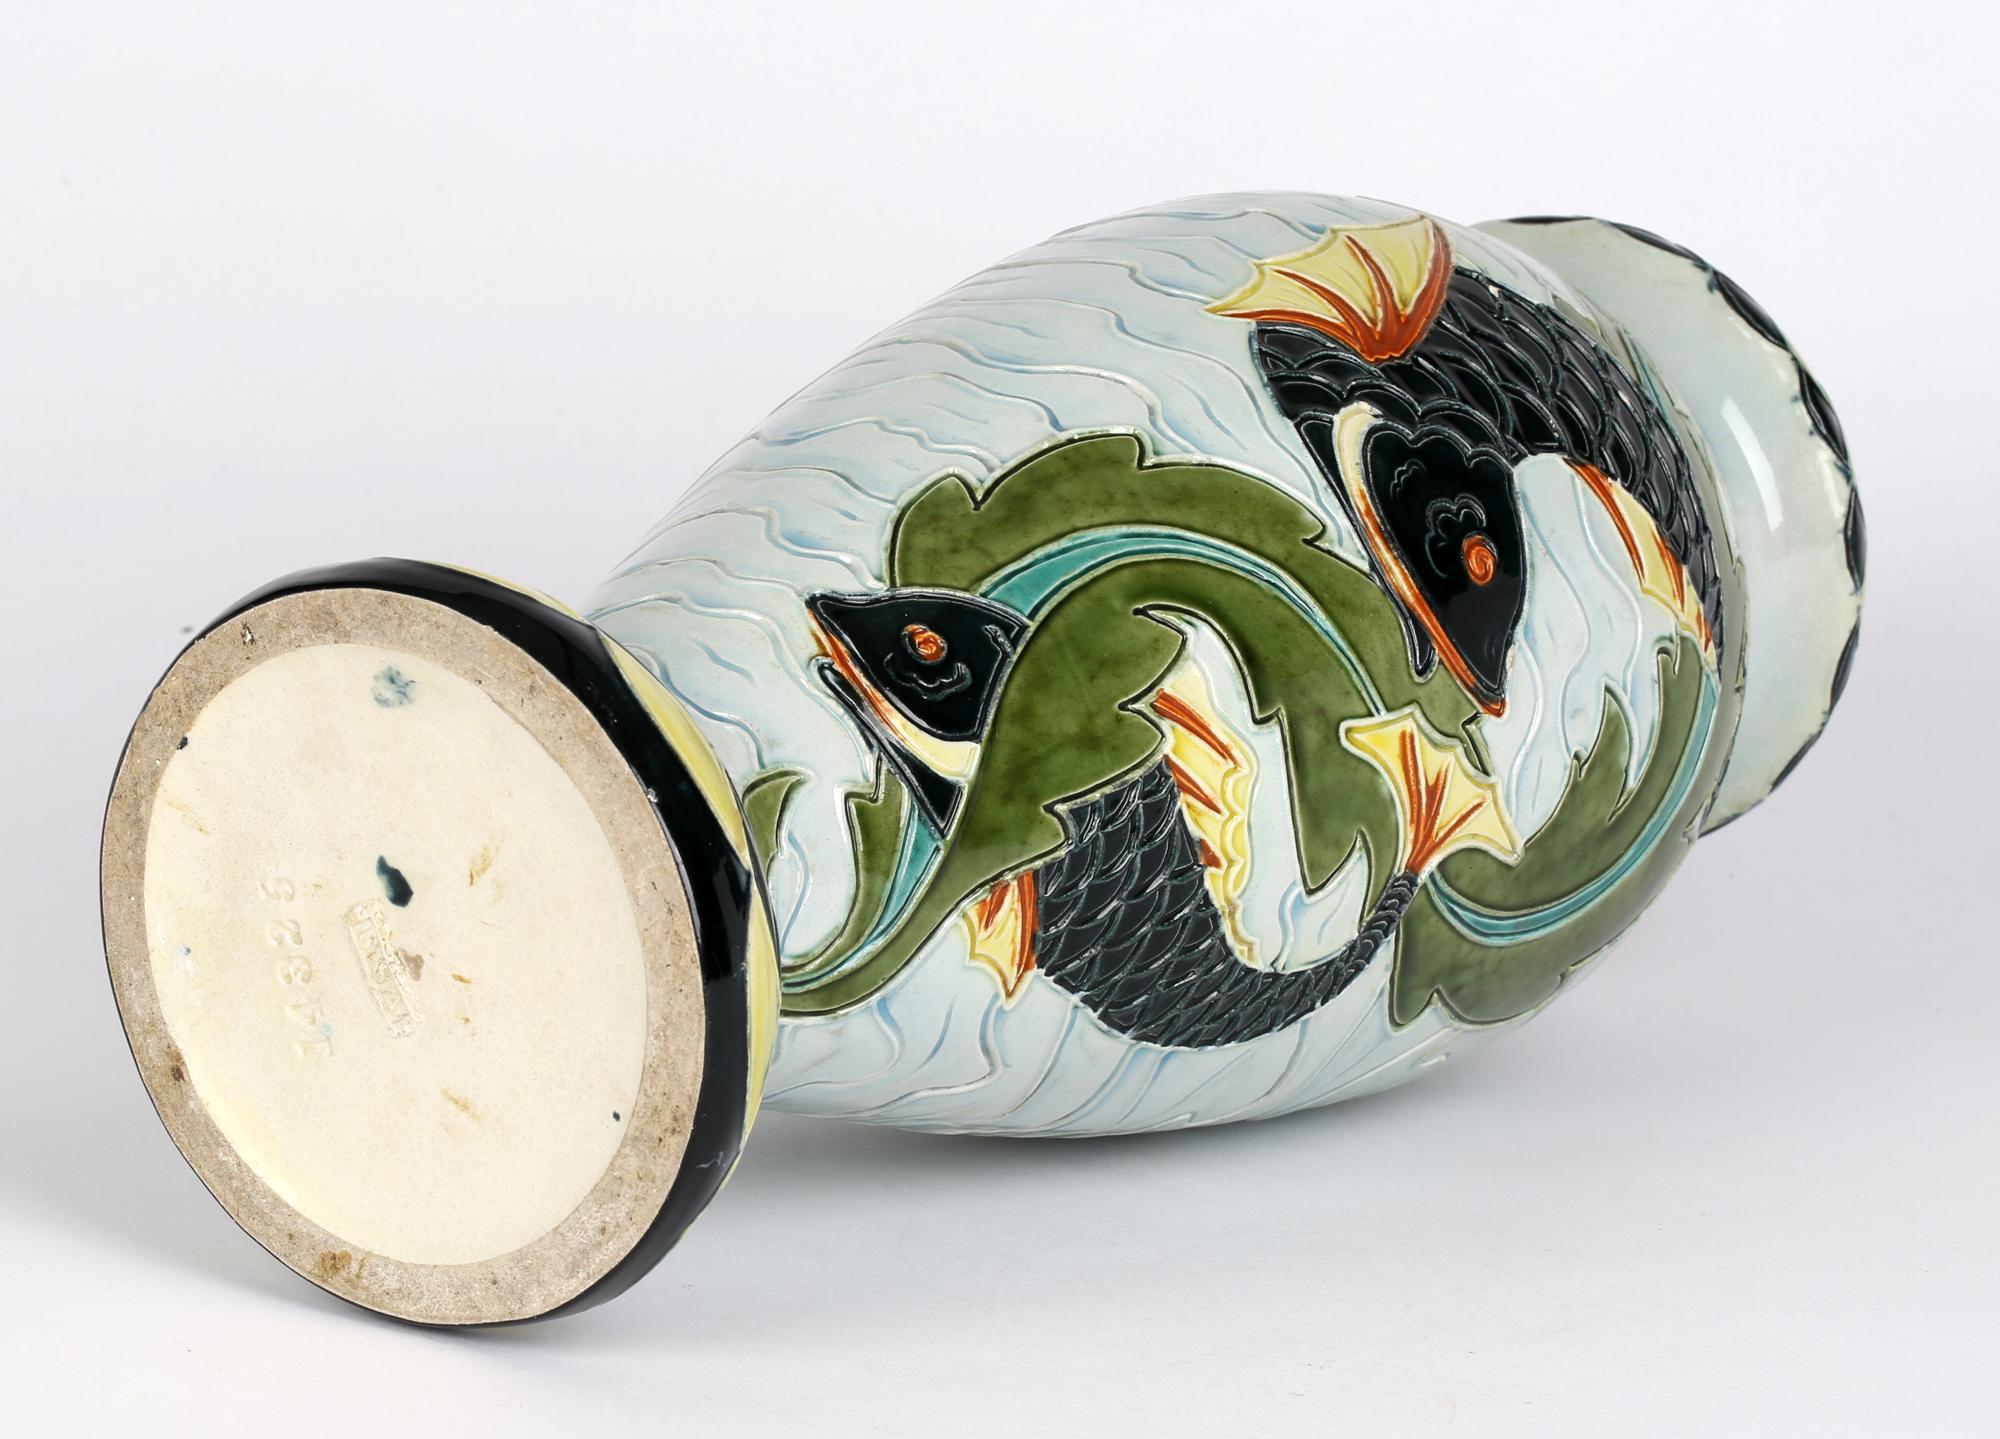 A large and unusual Austrian majolica art pottery vase decorated with fish swimming amidst seaweed by Wilhelm Schiller & Sohn and dating from around 1900. The tall lightly potted earthenware vase stands on a rounded domed base with a tall bulbous